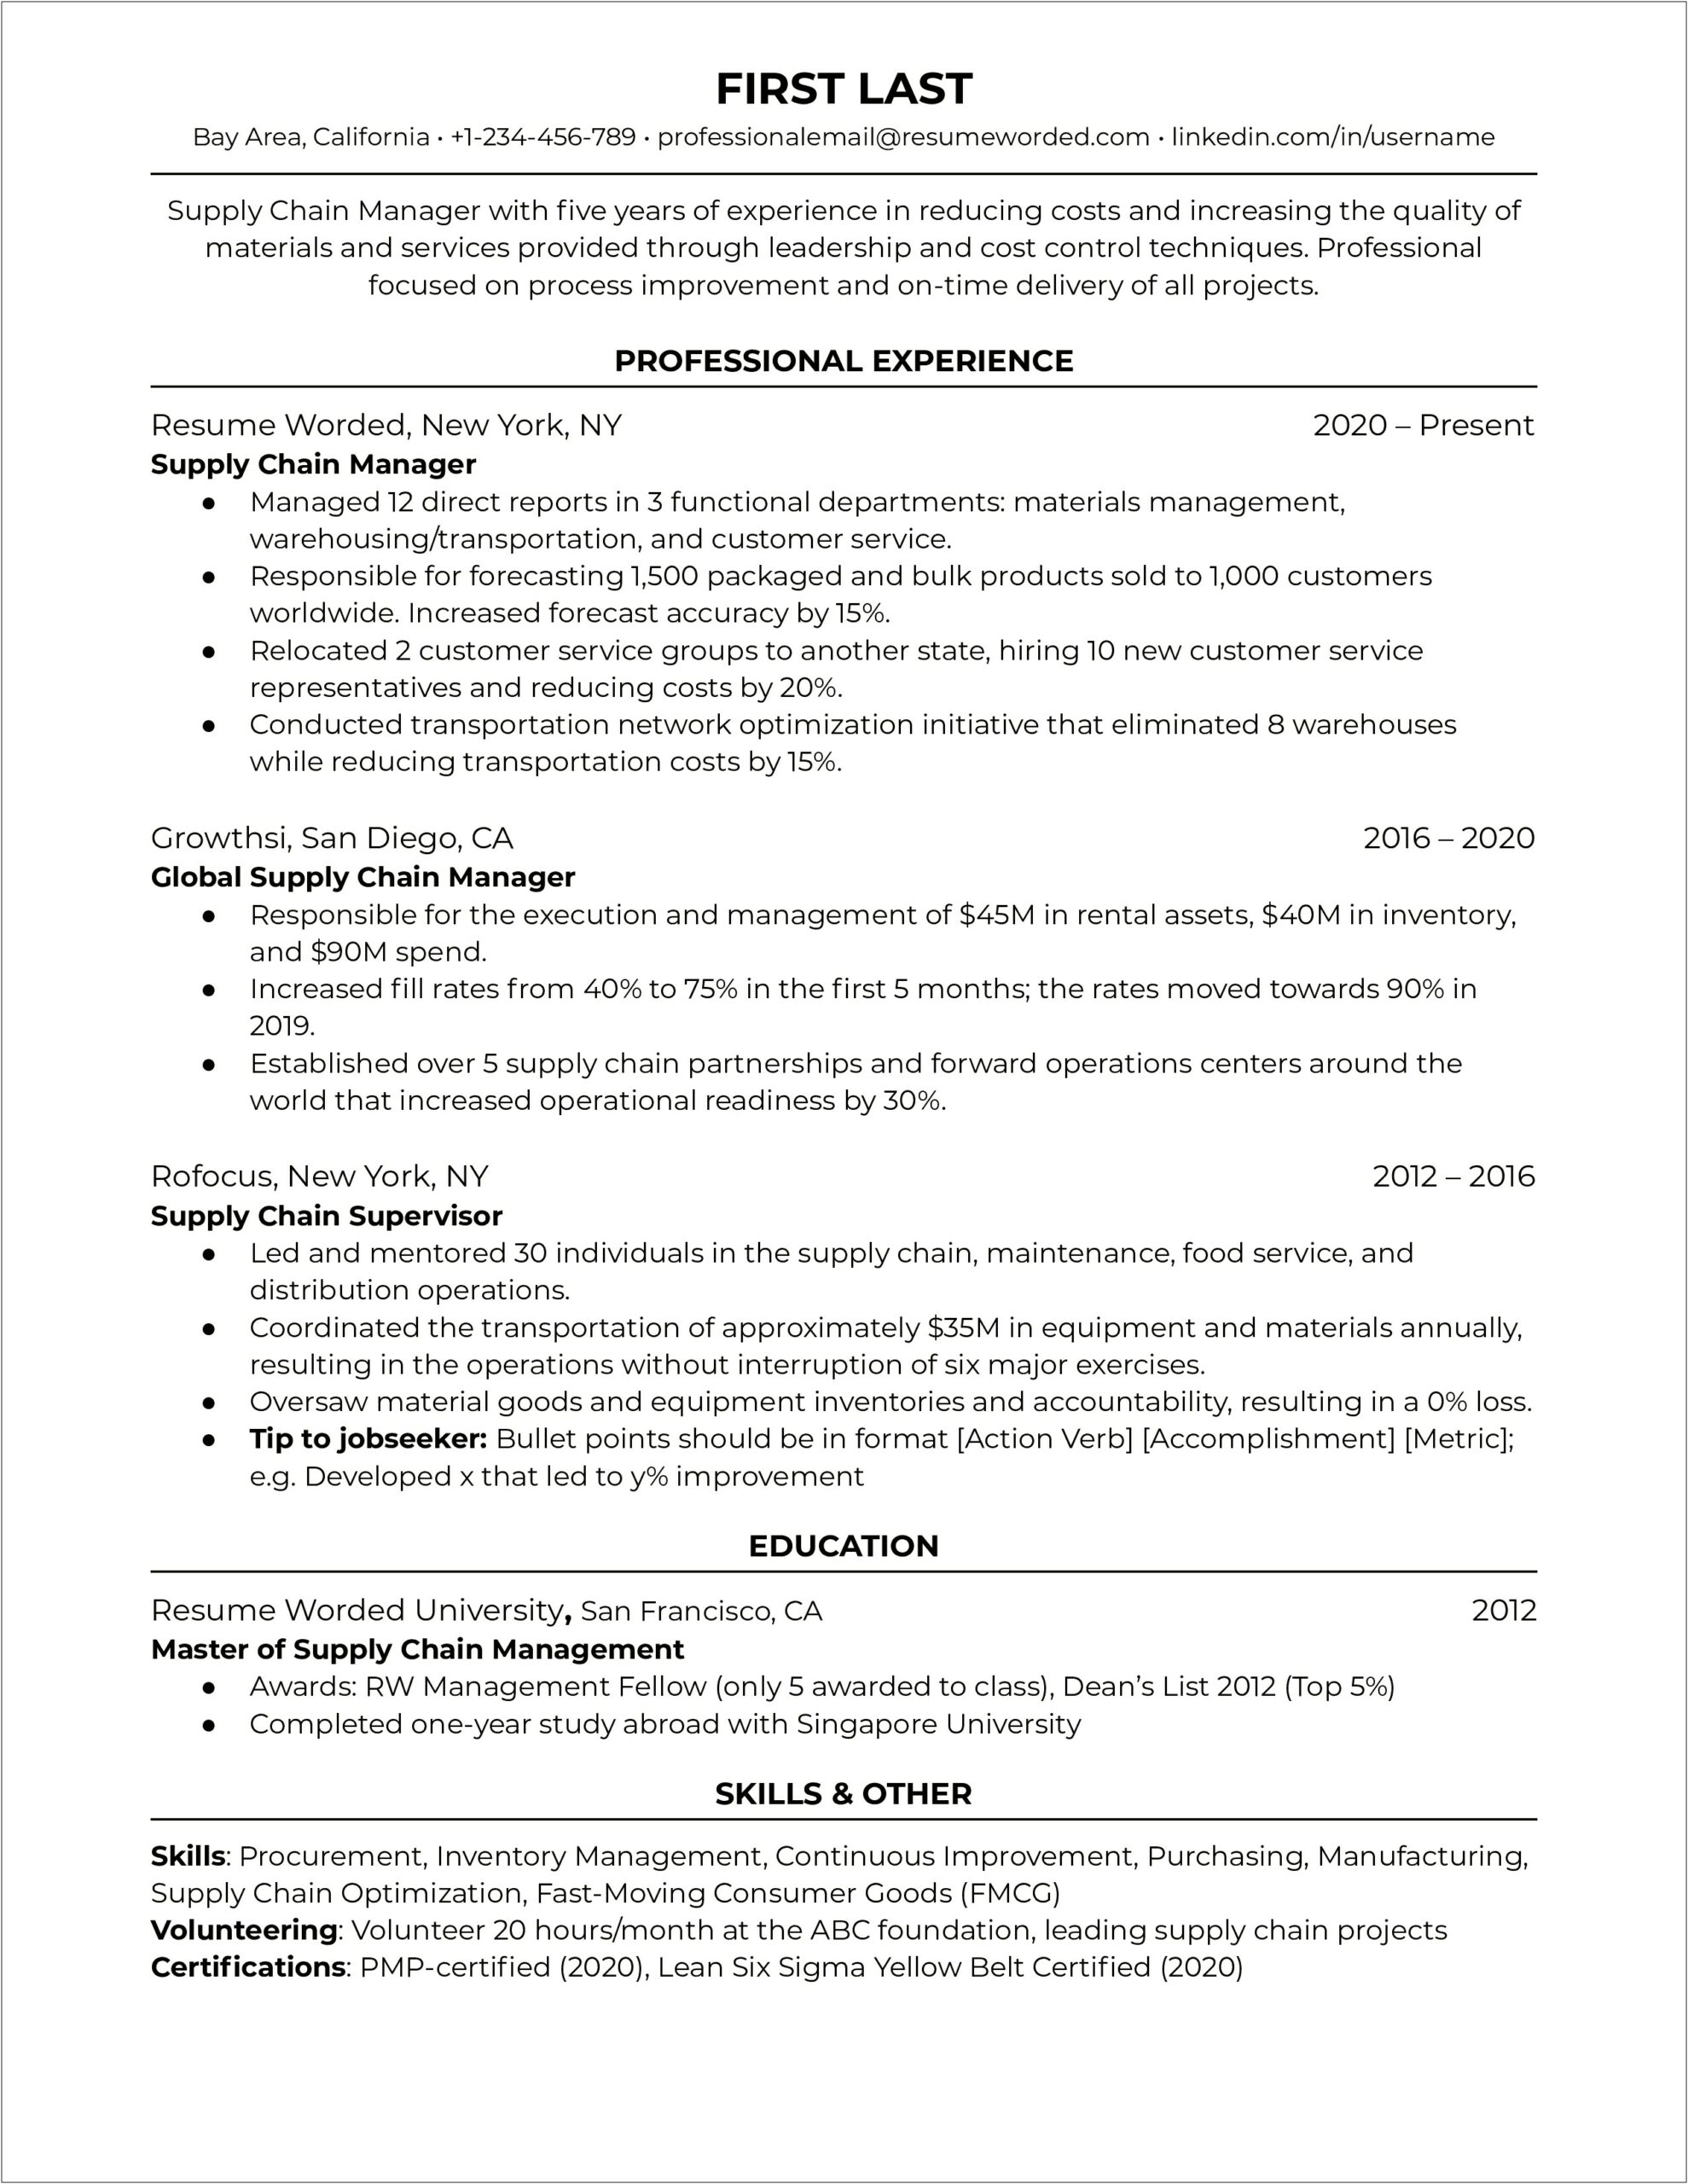 Supply Chain Professional Resume Examples